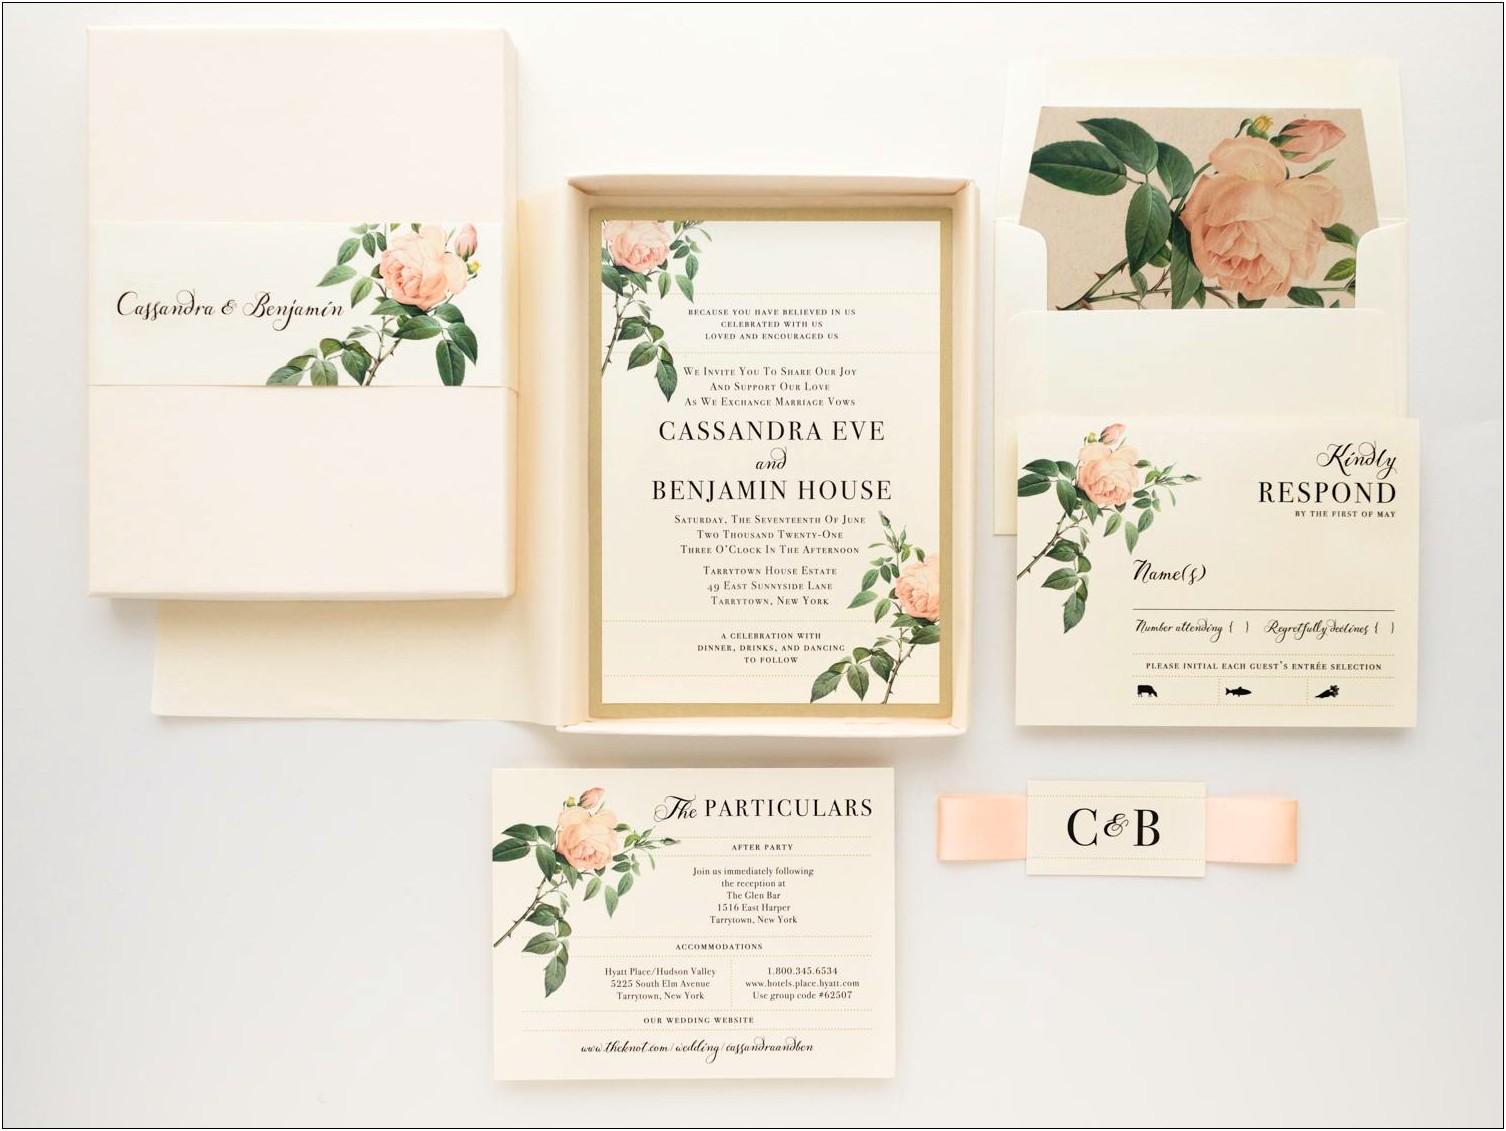 Hotel And Registry Info On Wedding Invitations